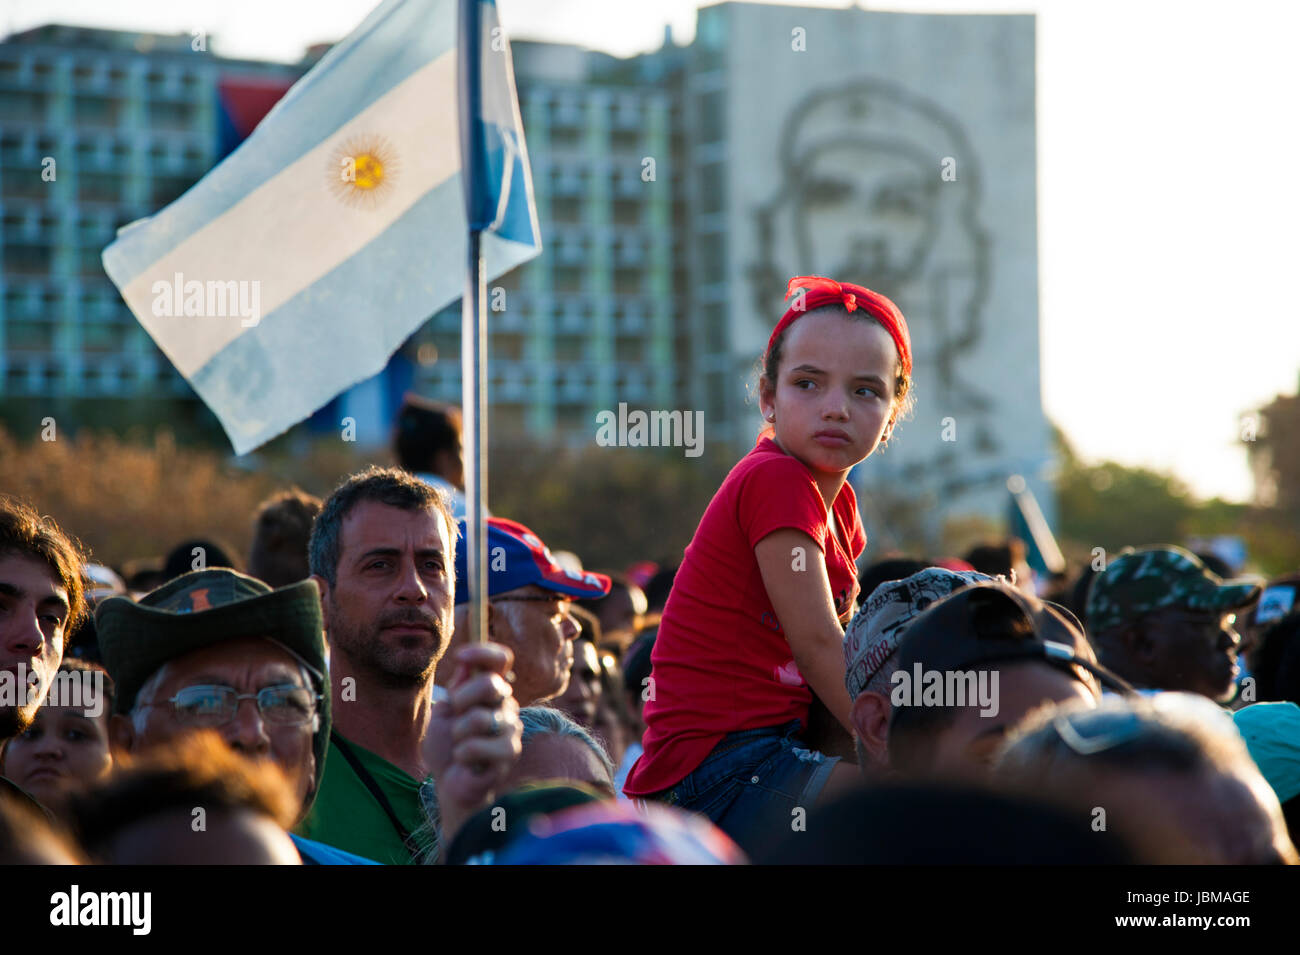 Young Cuban girl rides on man's shoulder at May Day parade  in Havana, Cuba's Revolutionary Square.  A figure of revolutionary hero Che Guevara. Stock Photo